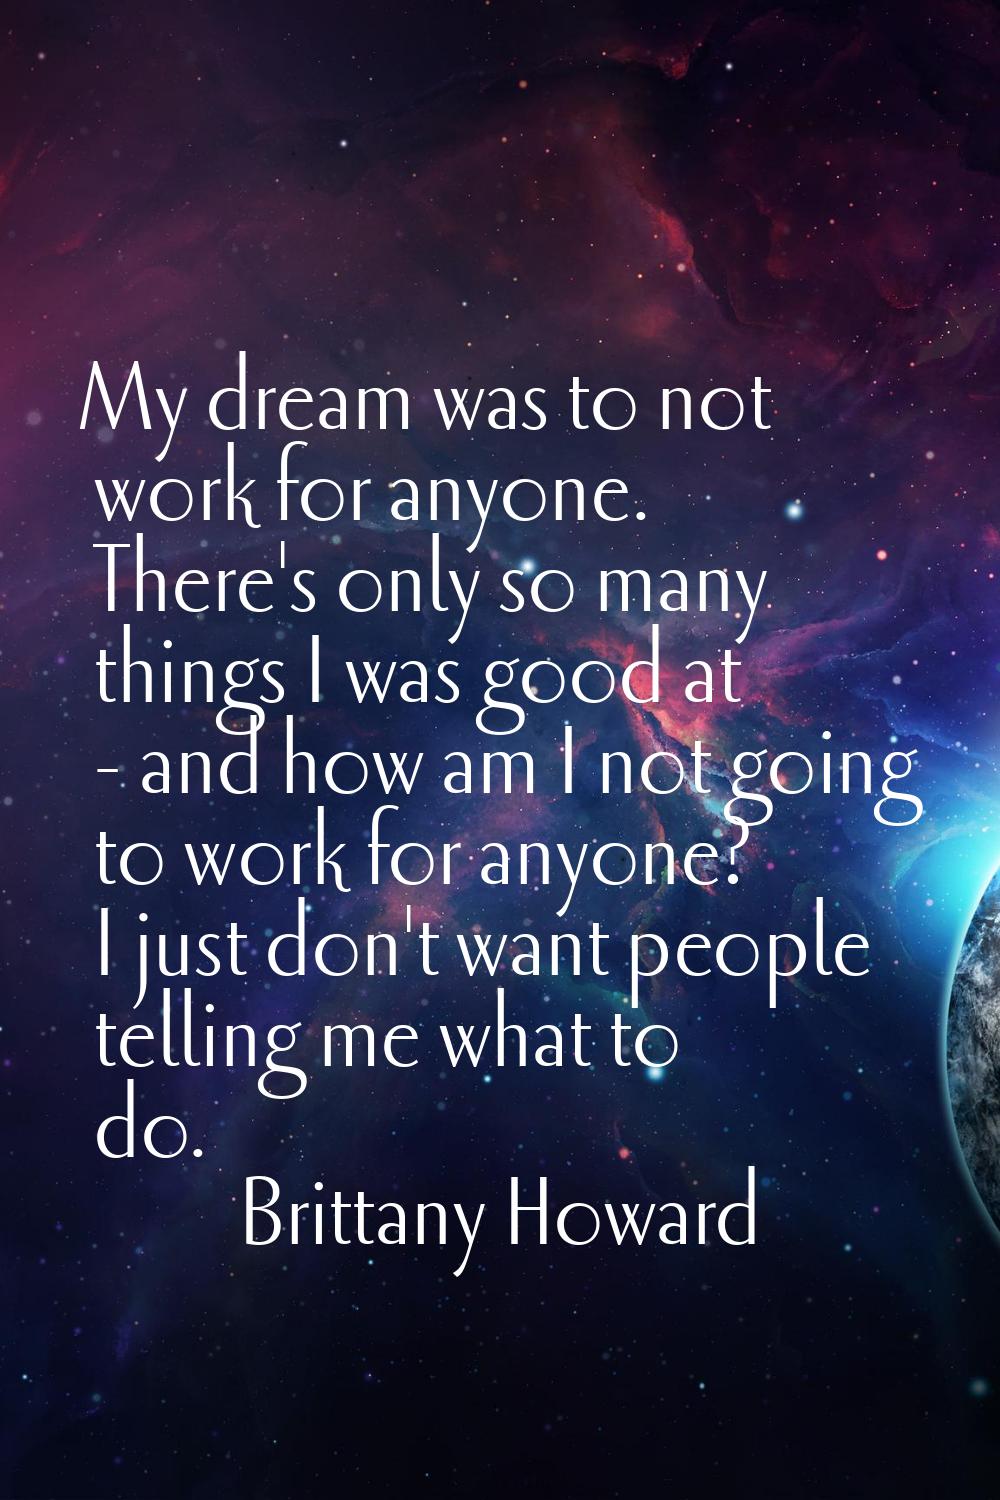 My dream was to not work for anyone. There's only so many things I was good at - and how am I not g